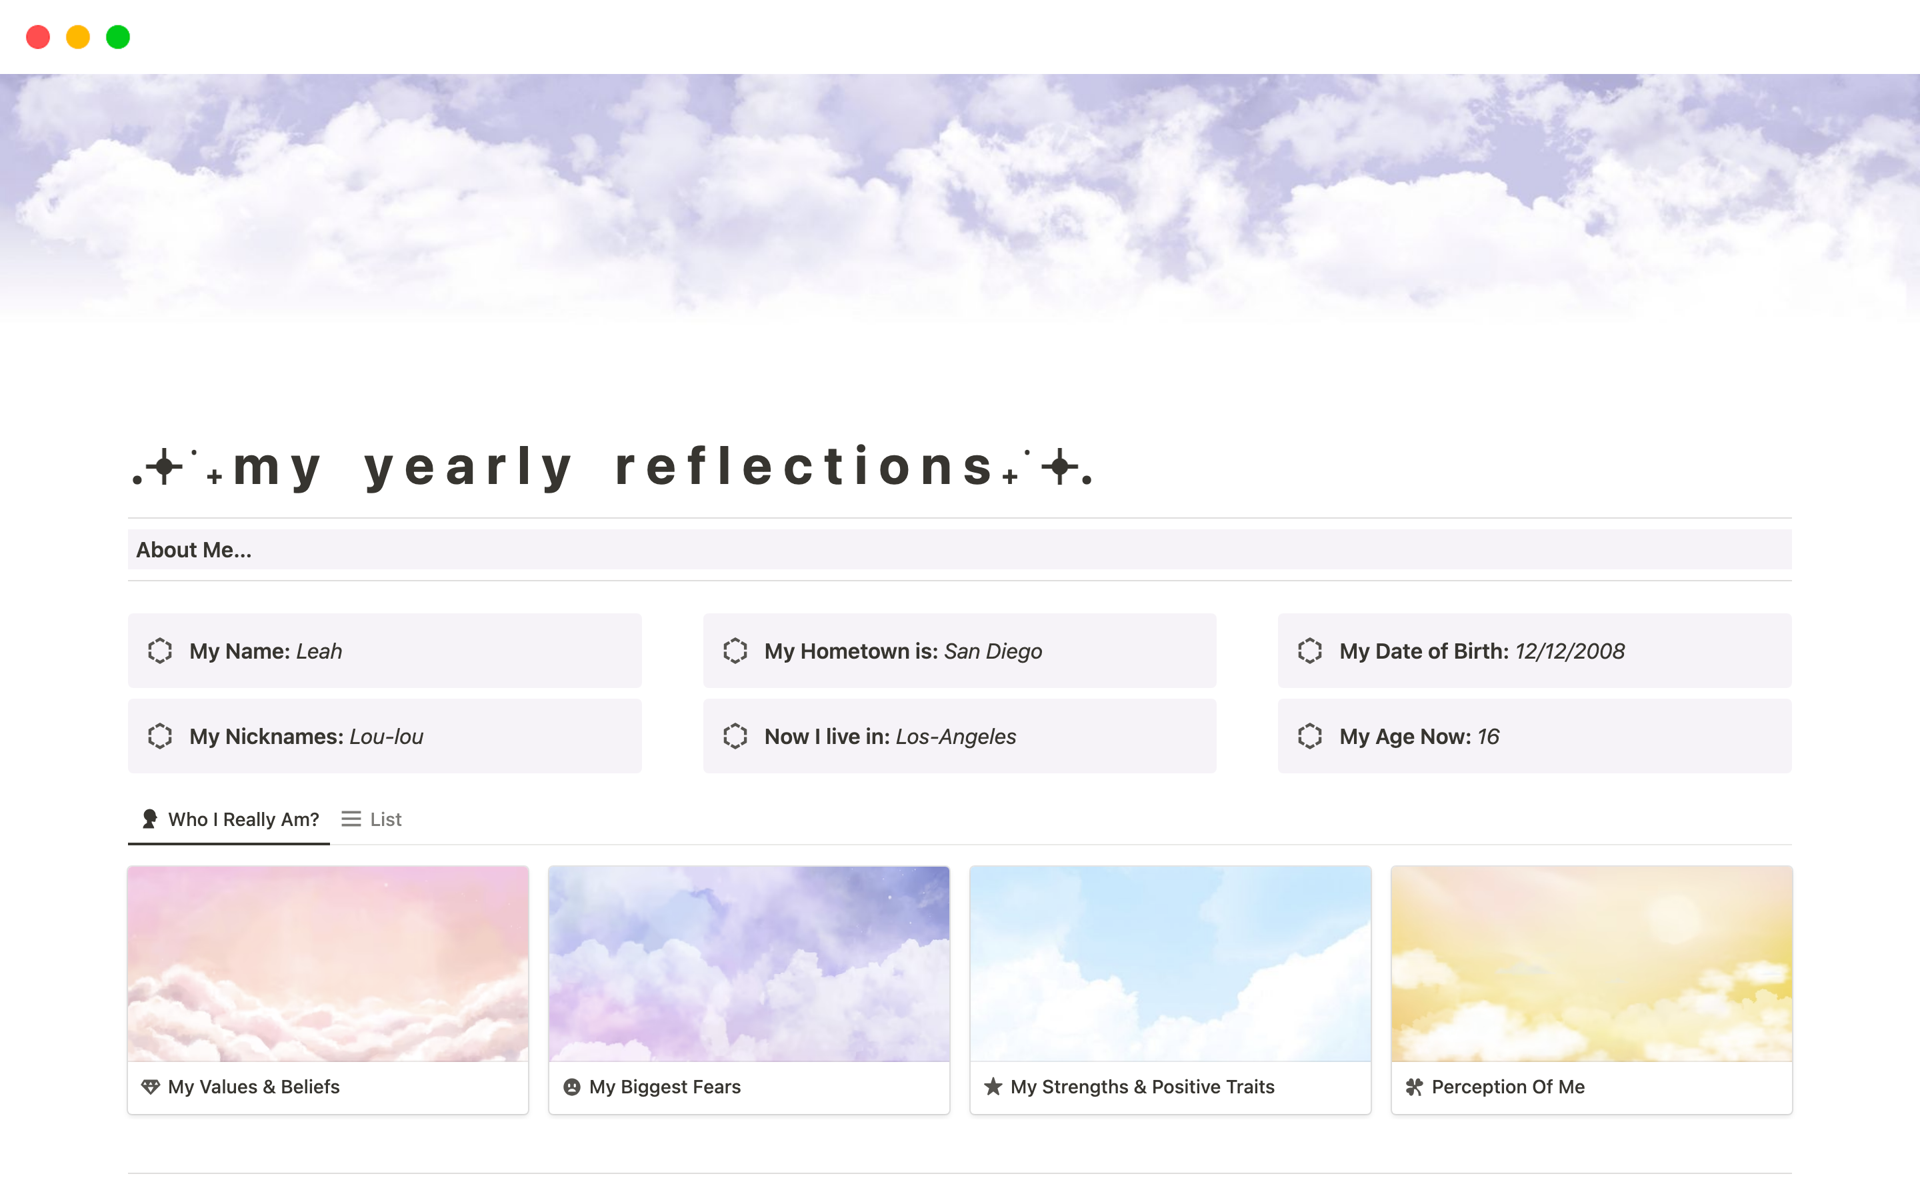 Get to Know Yourself Yearly Reflections, That Girl님의 템플릿 미리보기